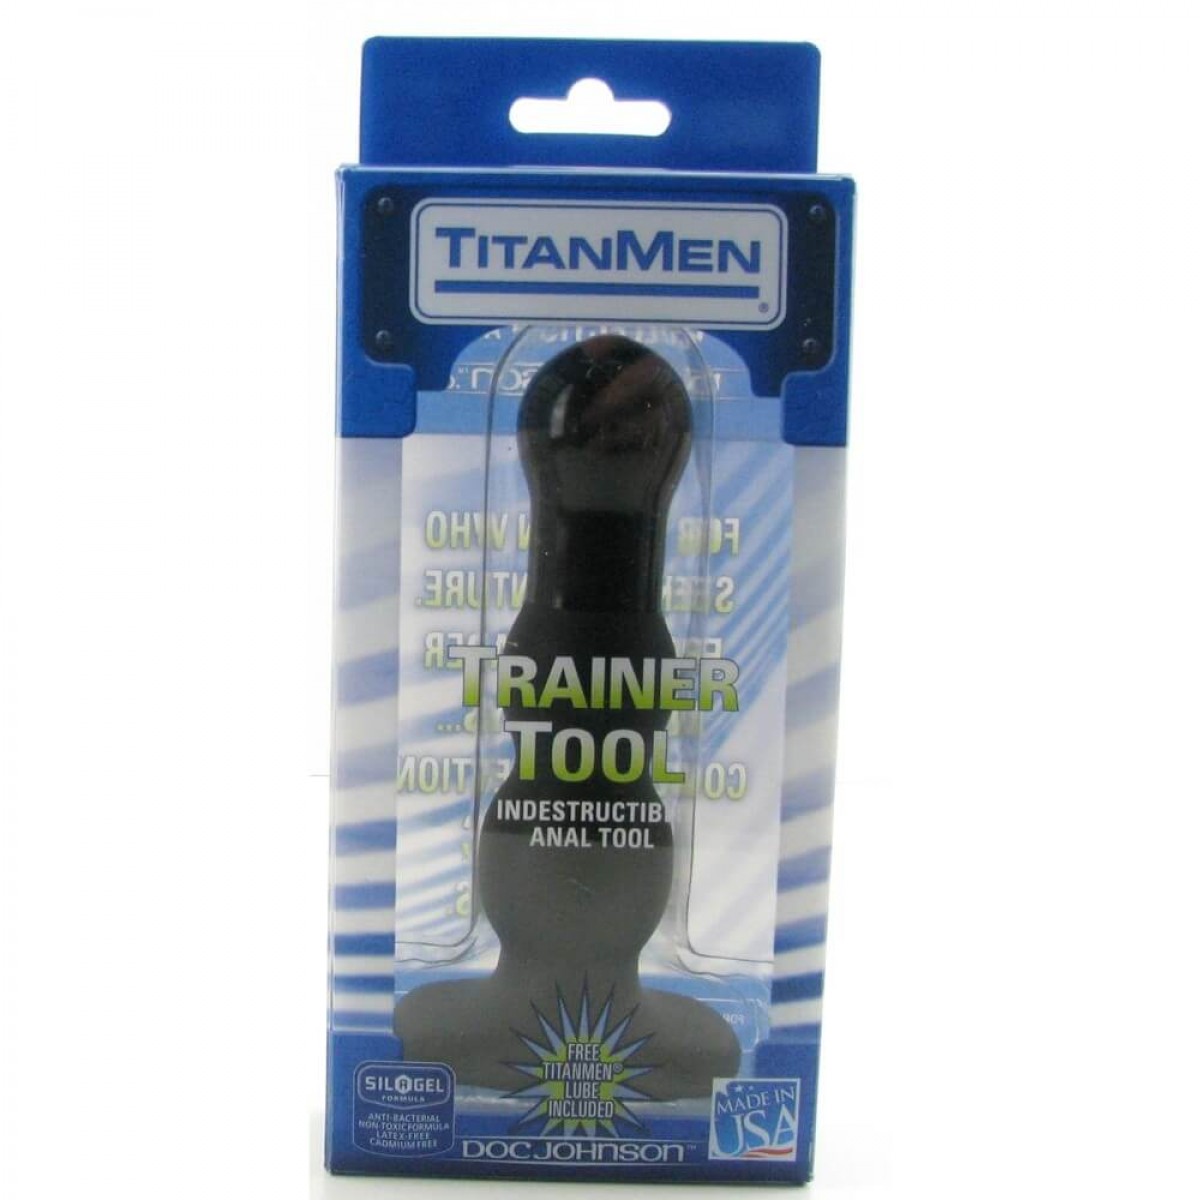 Sex Toys 1hr Delivery Titanmen Trainer Tool 3 Adult Store